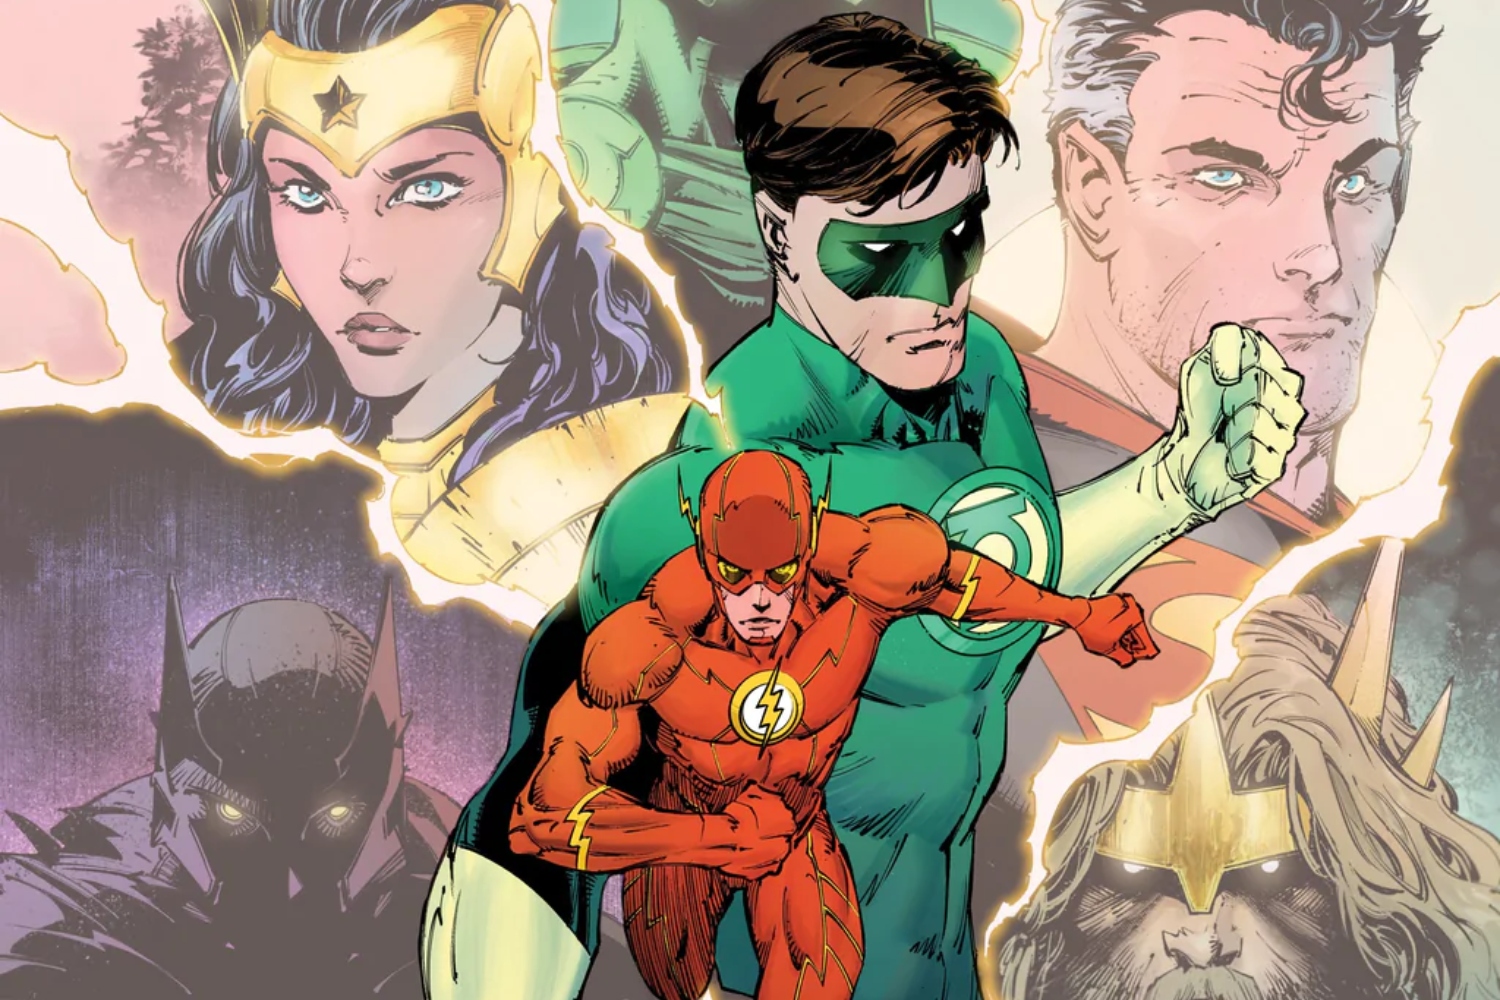 Joshua Willamson on the 'Brave and the Bold' in 'Dark Crisis on Infinite Earths' #4 and what's next